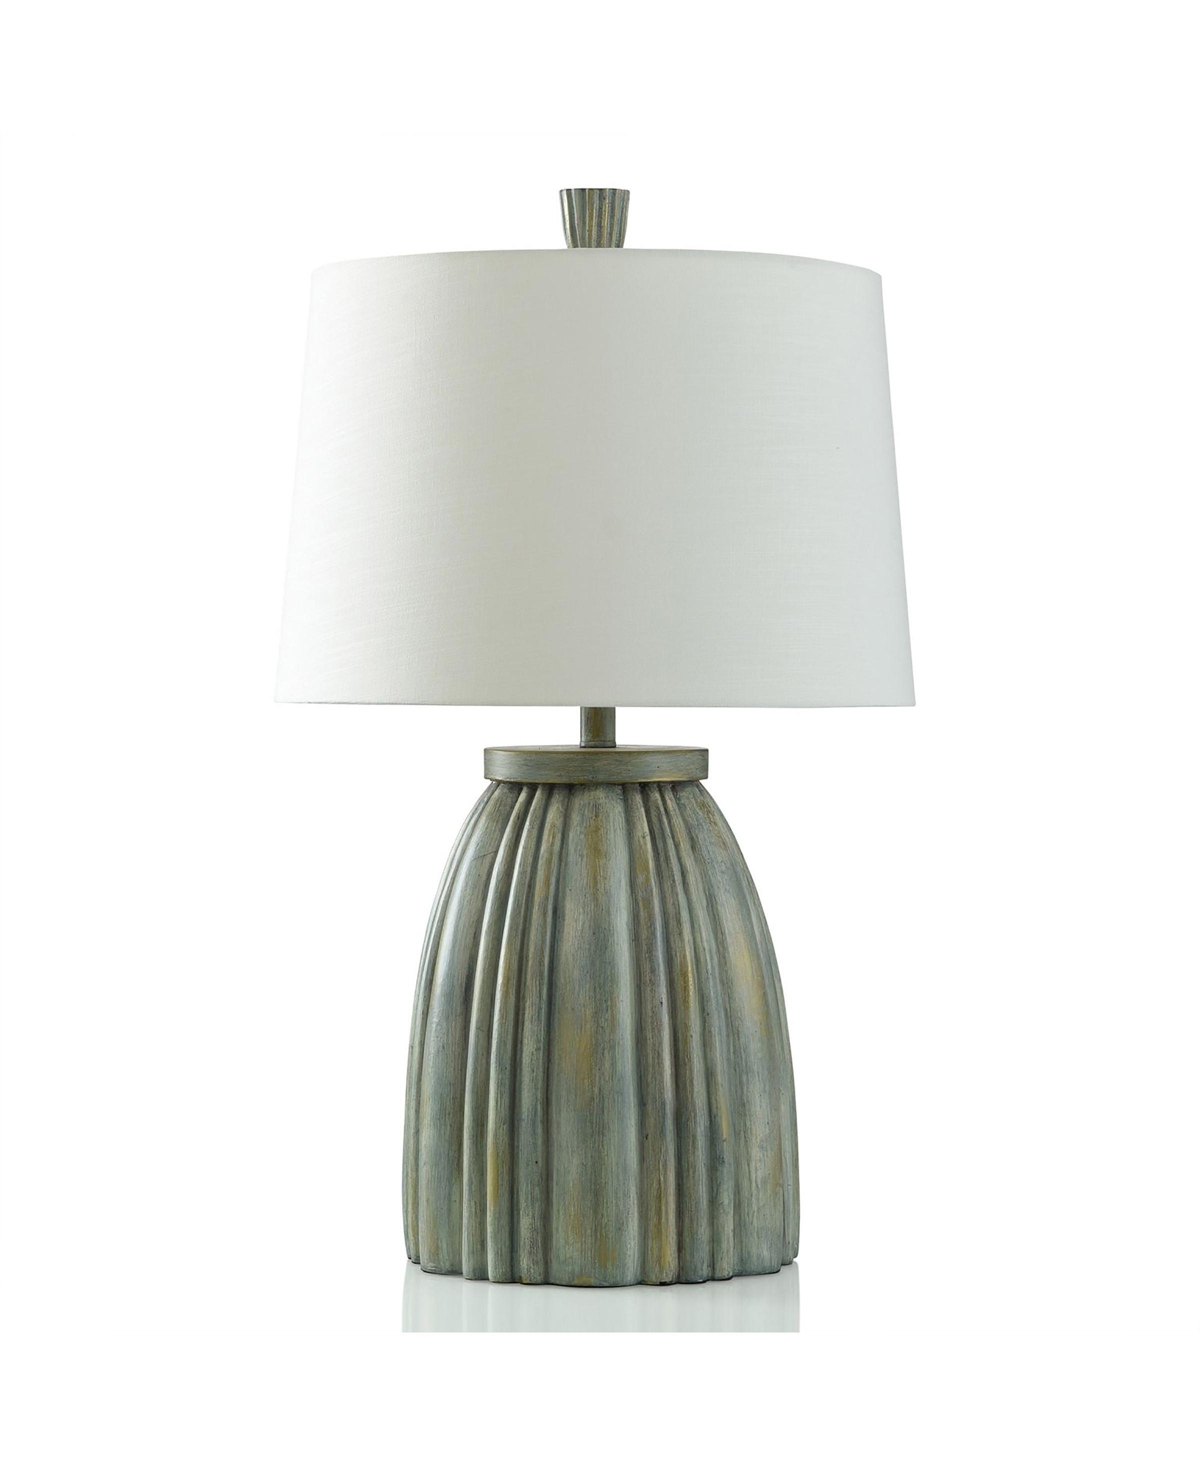 Stylecraft Home Collection 30" Hot Springs Stone Ribbed Base Table Lamp In Washed Sage Green,gold